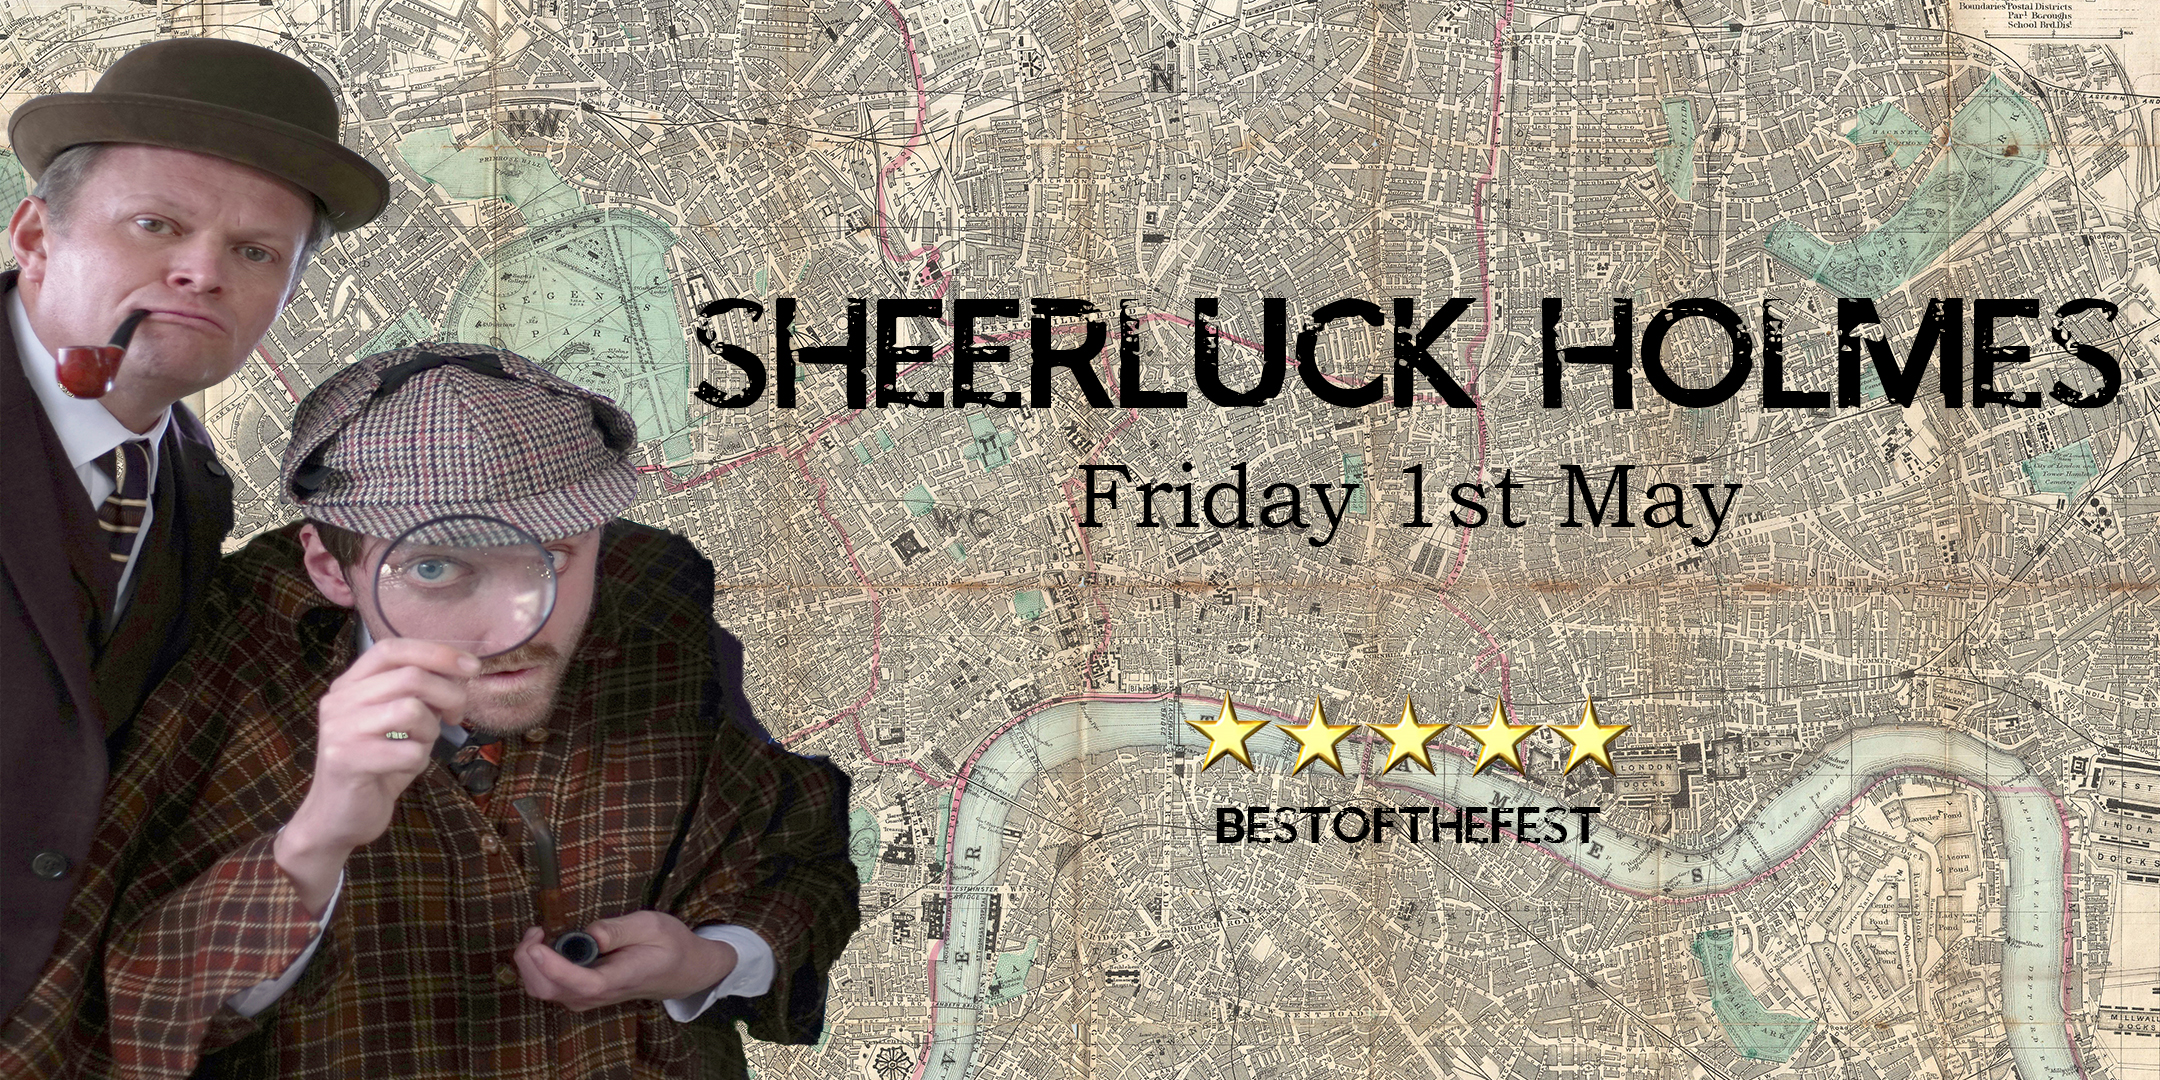 ‘Sheerluck Holmes’ comes to Bournemouth Pier – experience an immersive murder mystery dining experience!